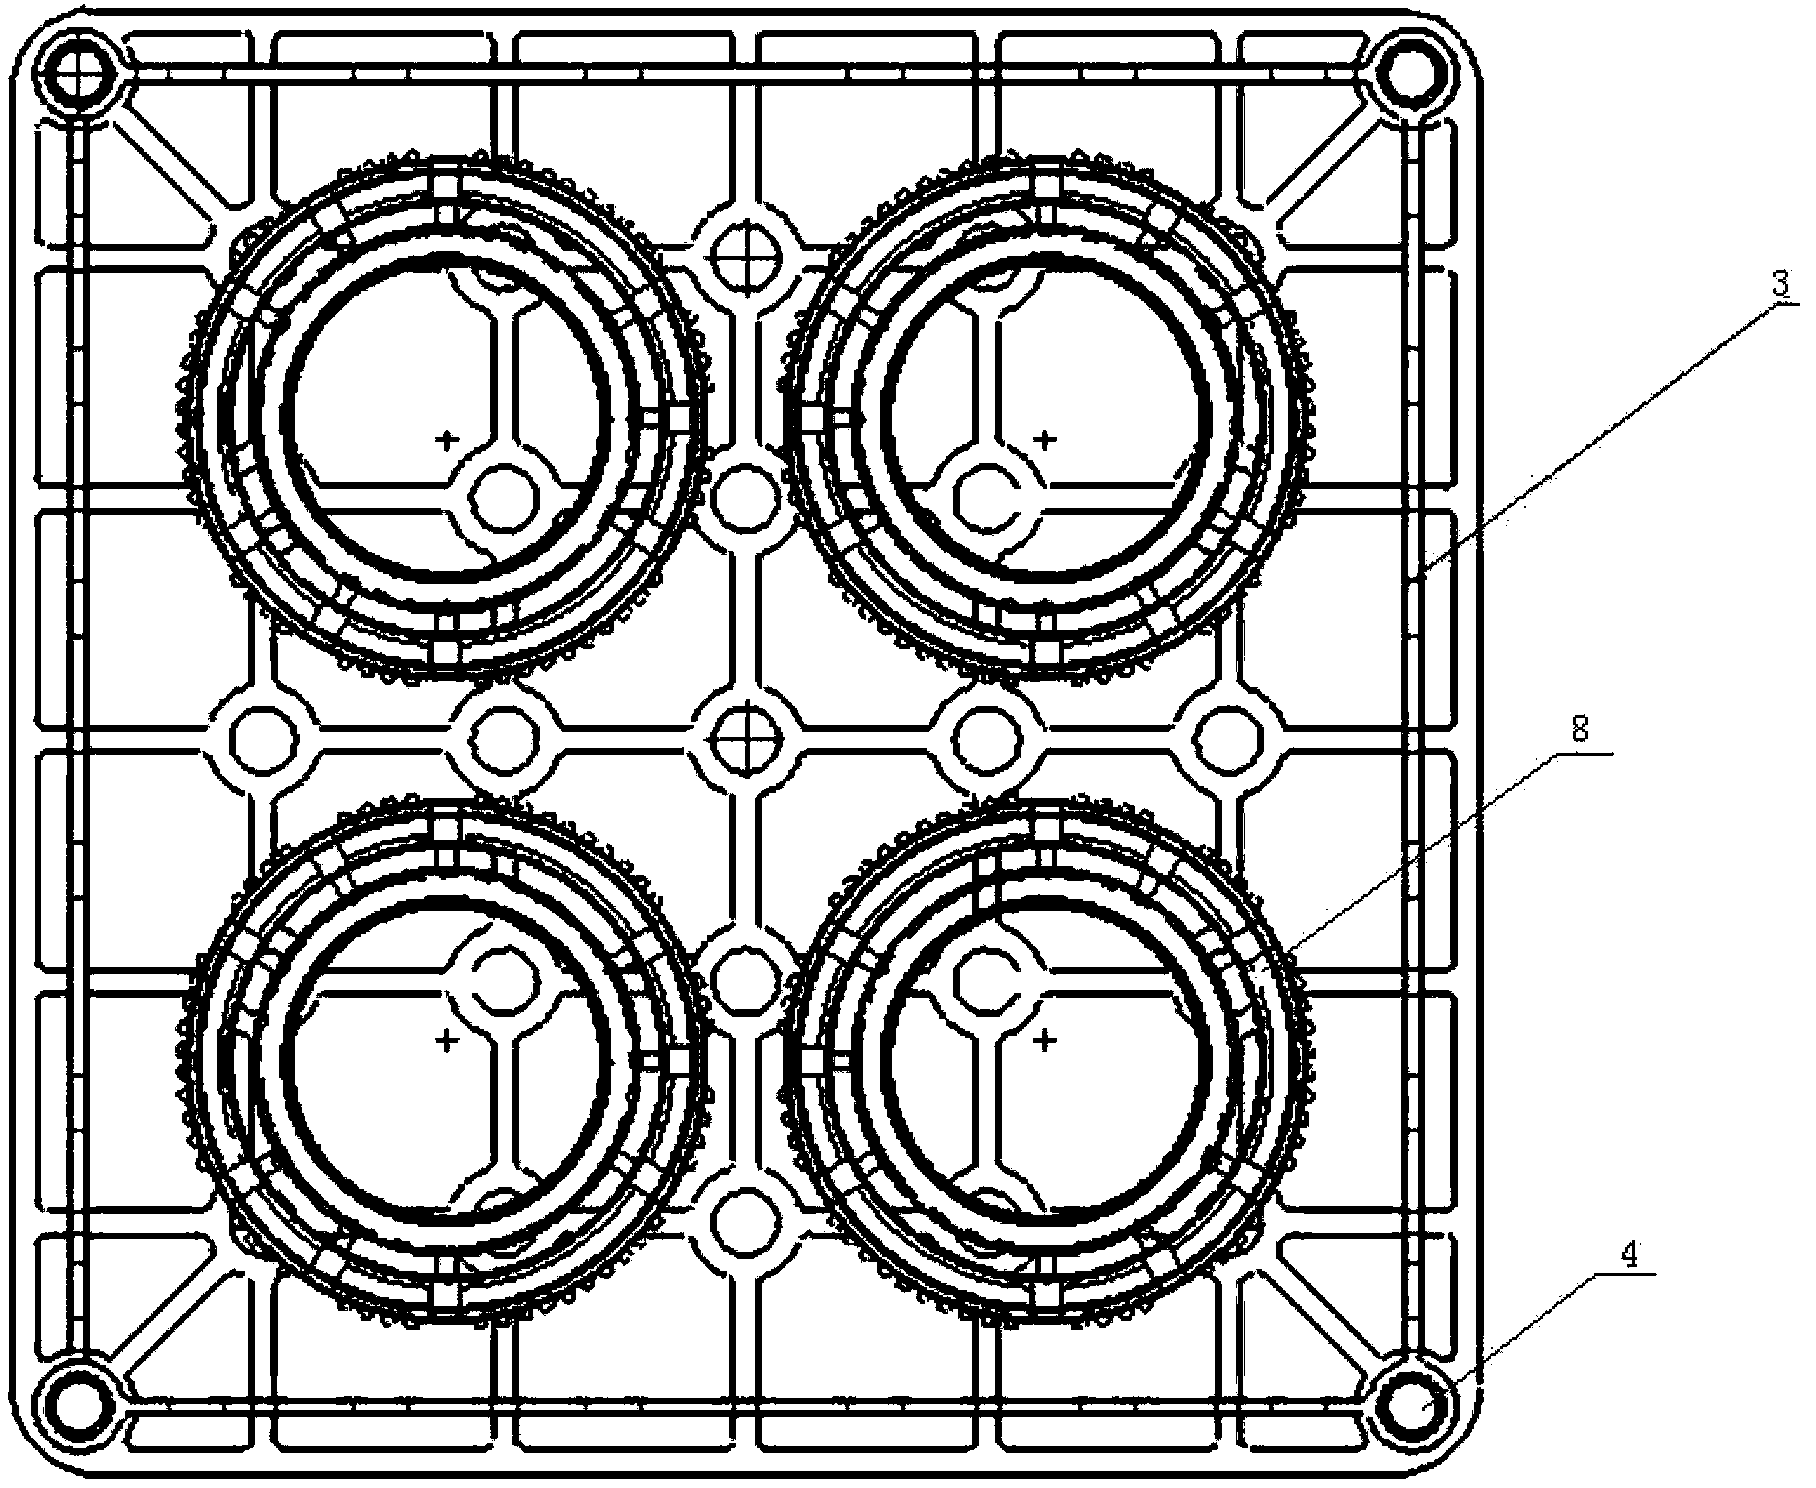 Charging basket for thermal treatment of synchronizer gear hub